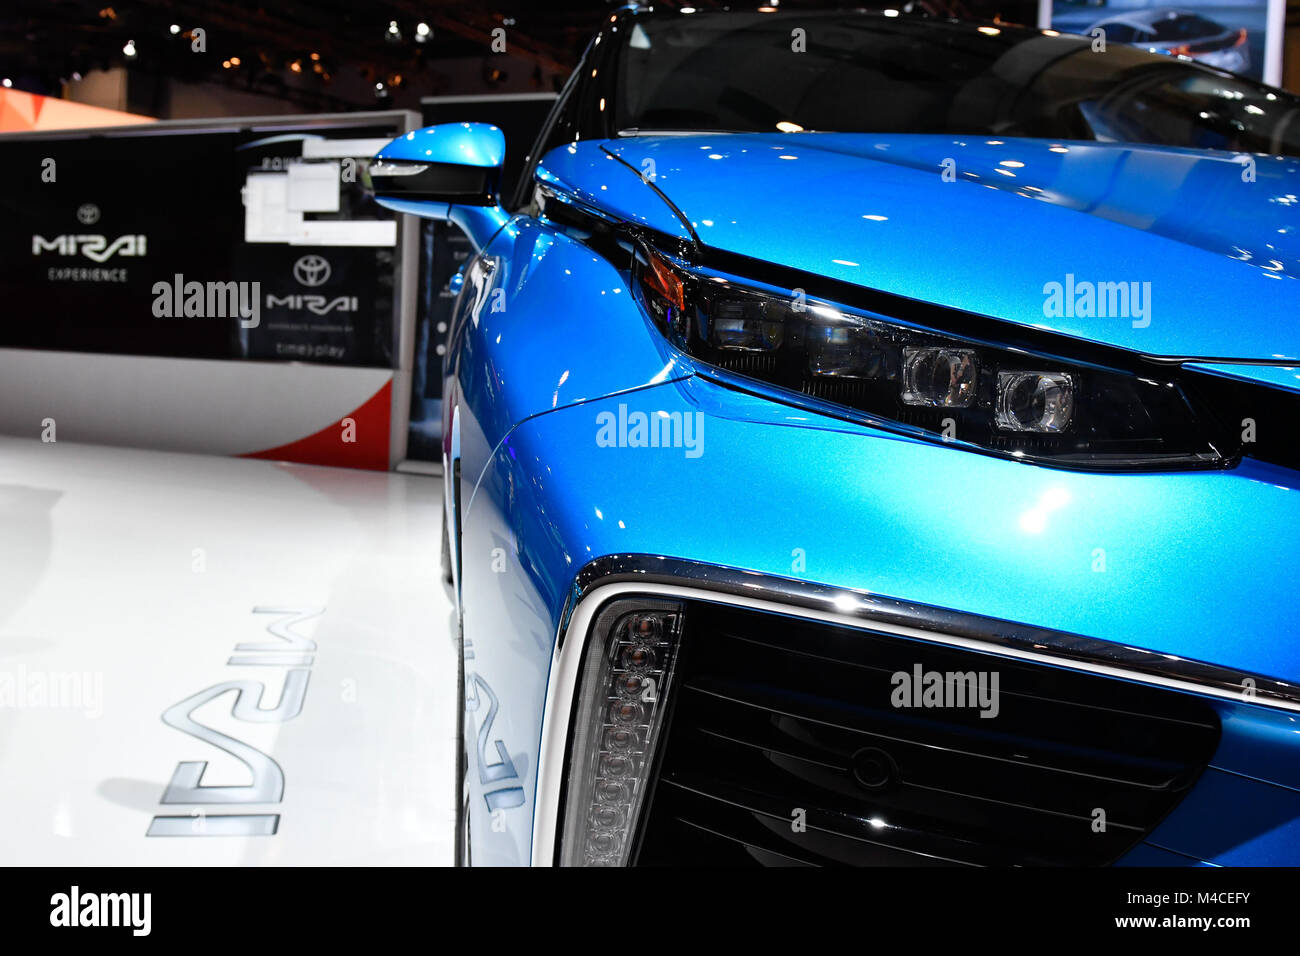 Toronto, Canada. February 15, 2018. A close-up view of the  headlight and grill of the Toyota's hydrogen vehicle MIRAI on display at the 2018 Canadian International Autoshow media preview day at the Metro Toronto Convention Centre.   Dominic Chan/EXimages Stock Photo